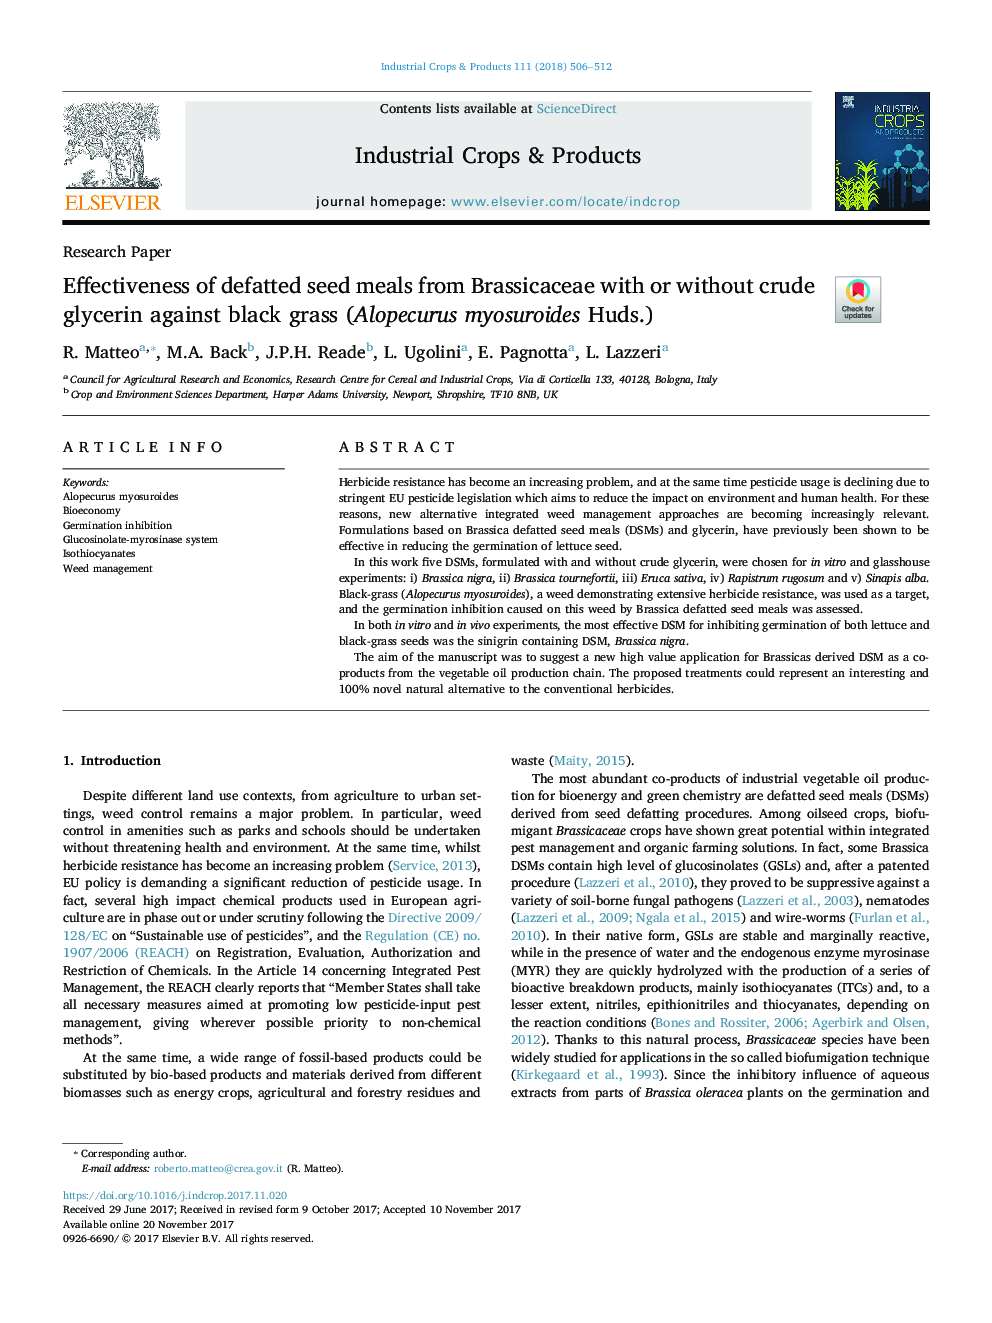 Effectiveness of defatted seed meals from Brassicaceae with or without crude glycerin against black grass (Alopecurus myosuroides Huds.)